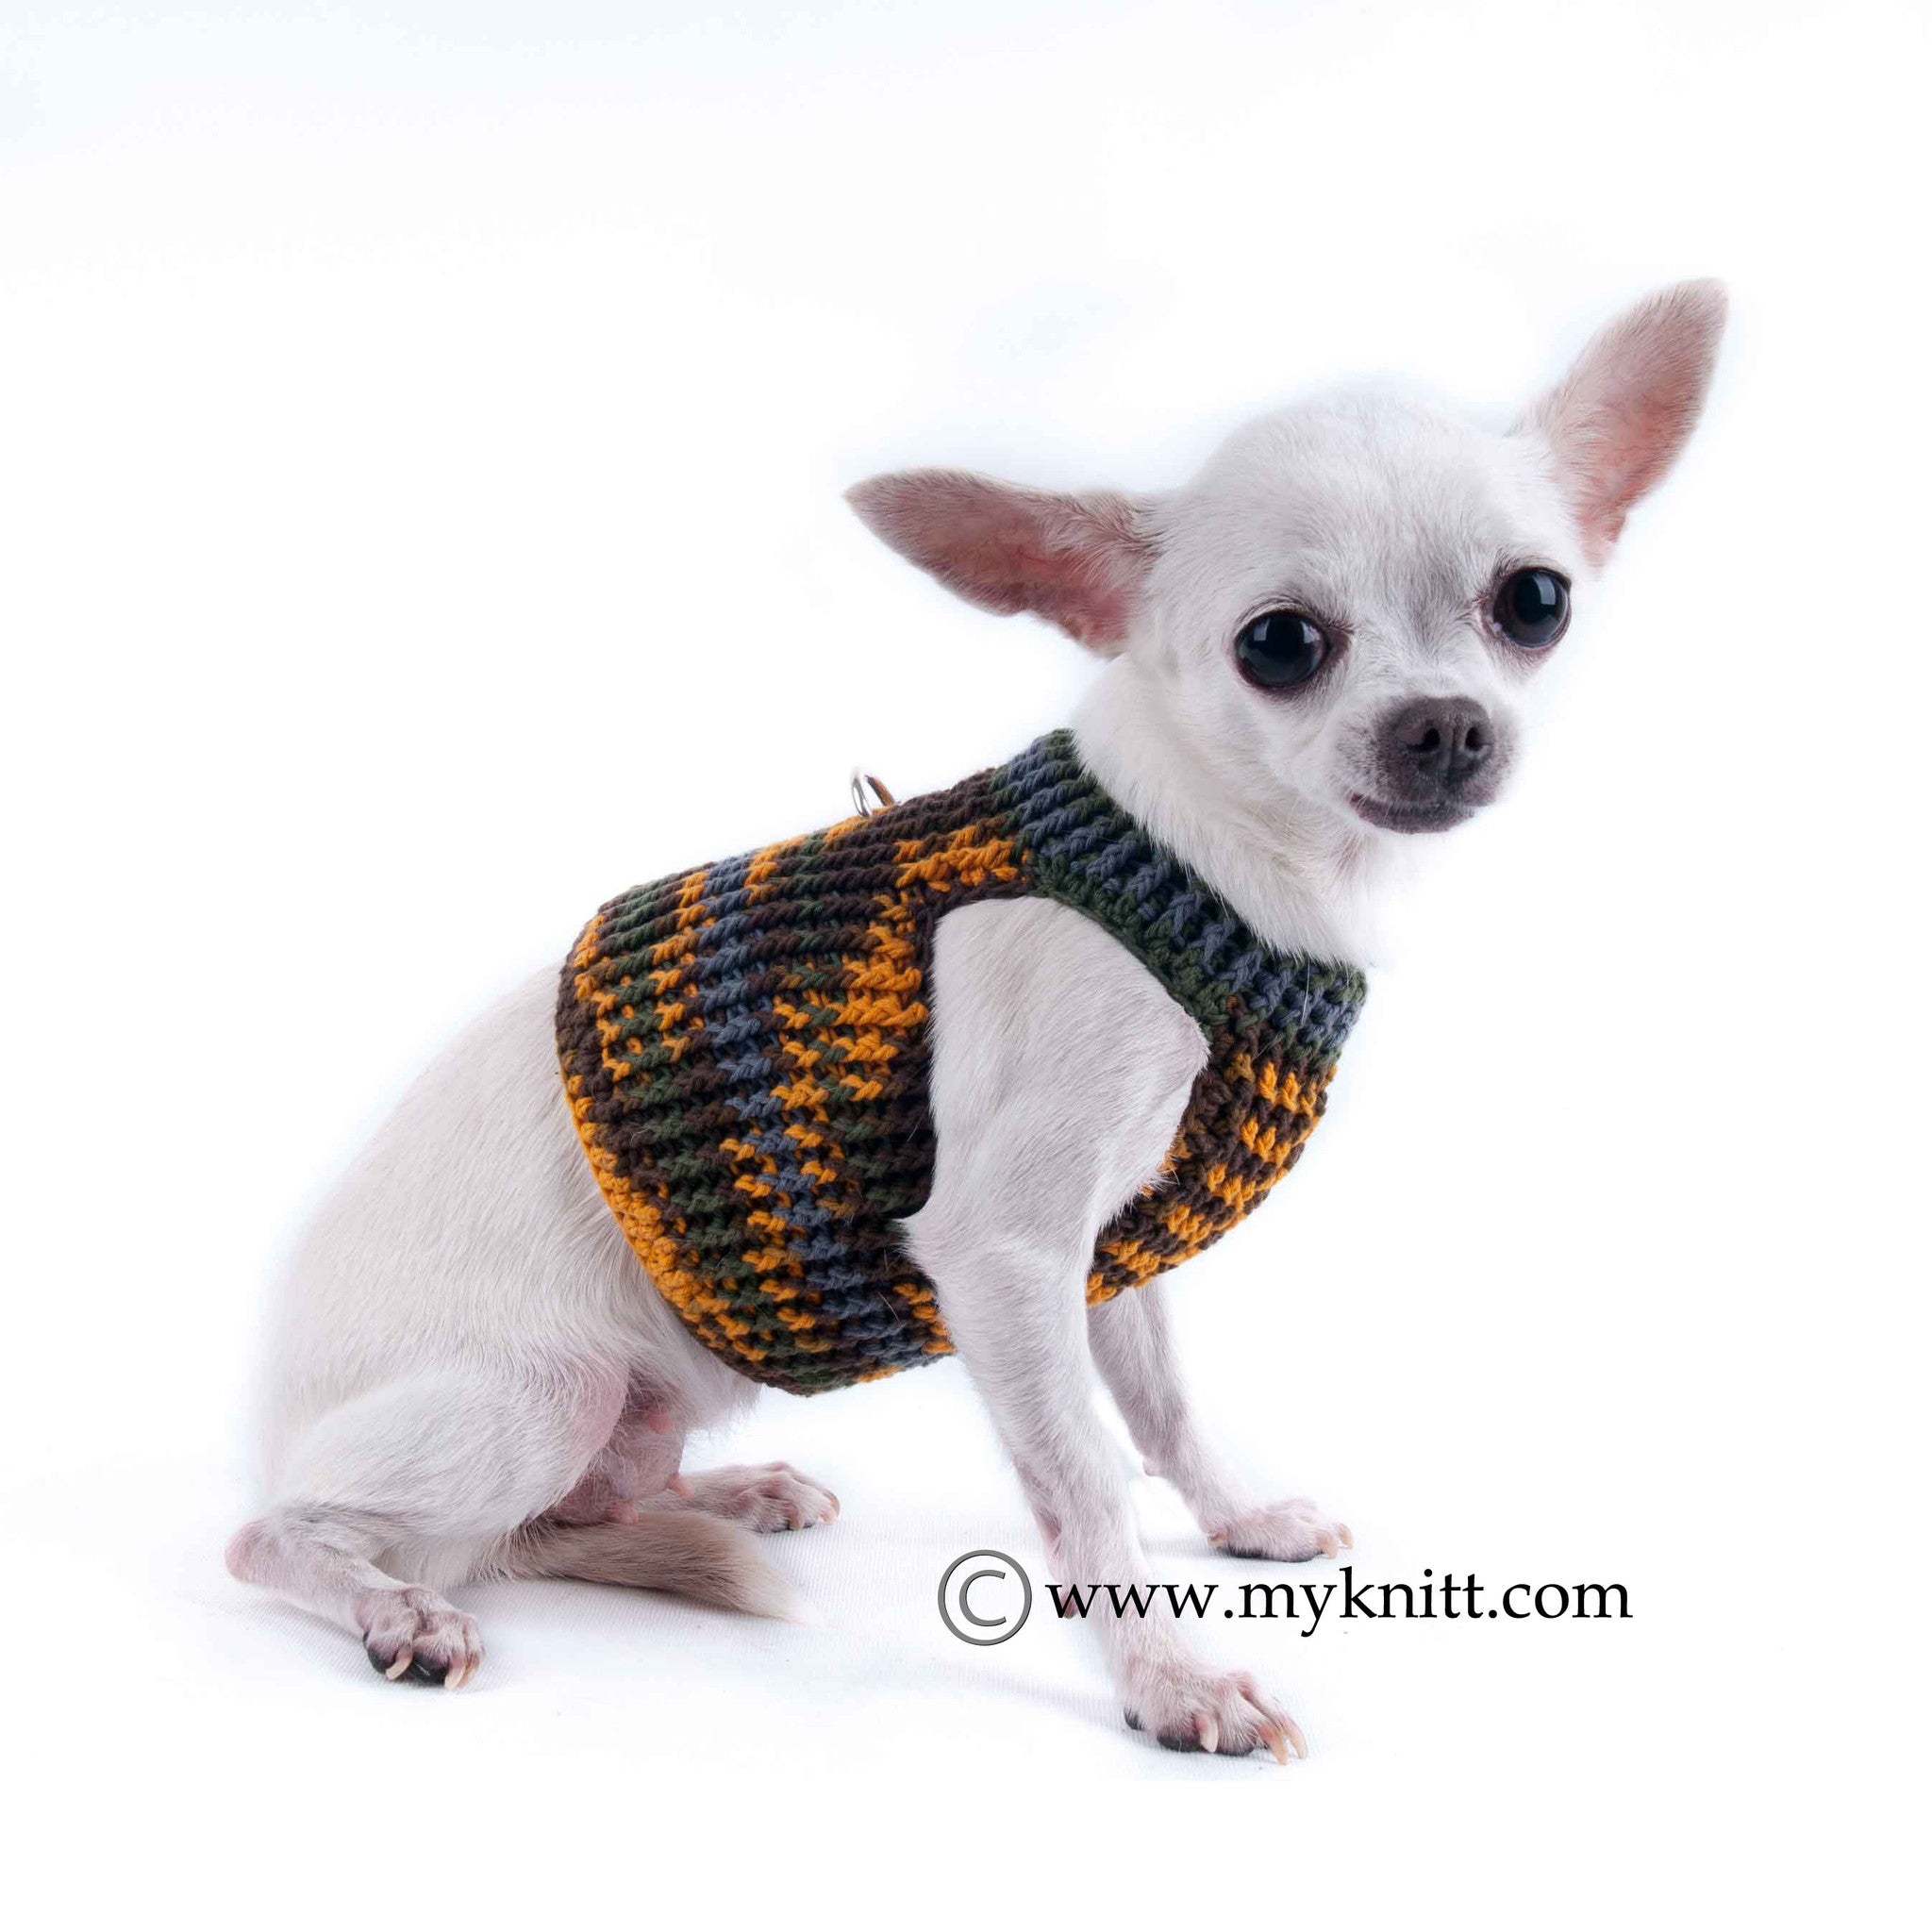 Camo Dog Clothes with Ring D Handmade Crochet Pet Harness DH3